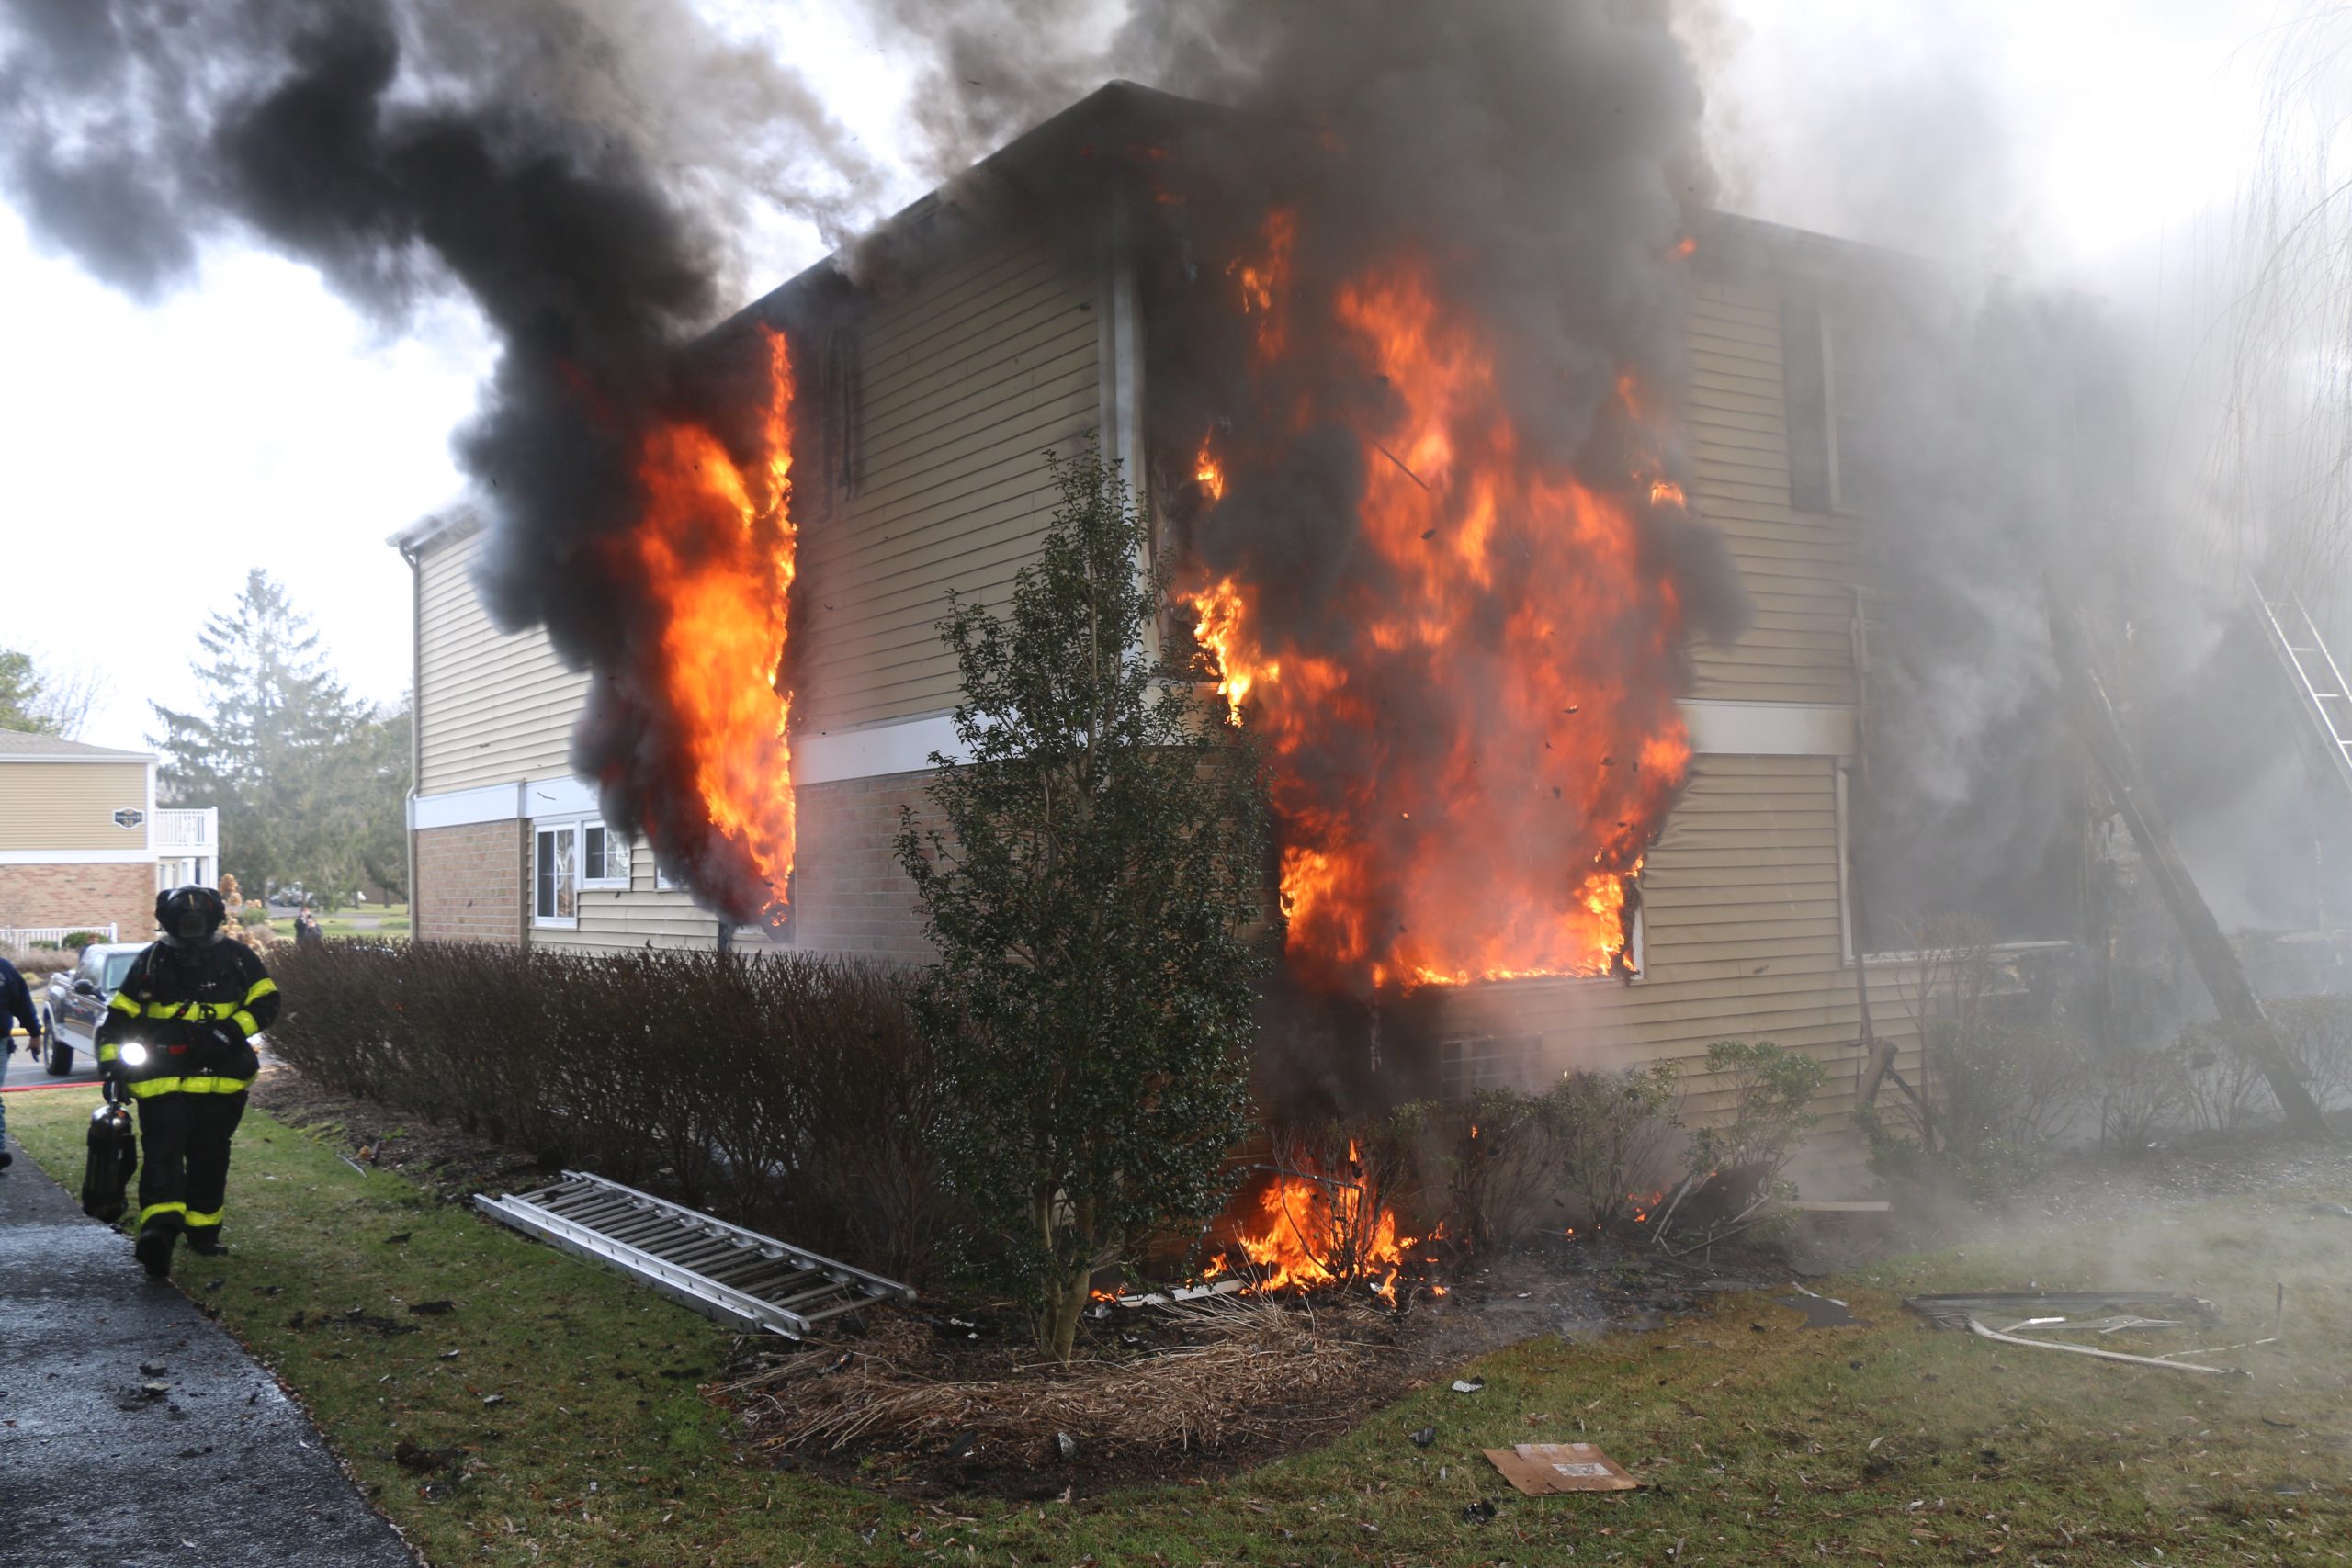 Mutual Aid – Holtsville Firefighters respond to Fire in Lakeland